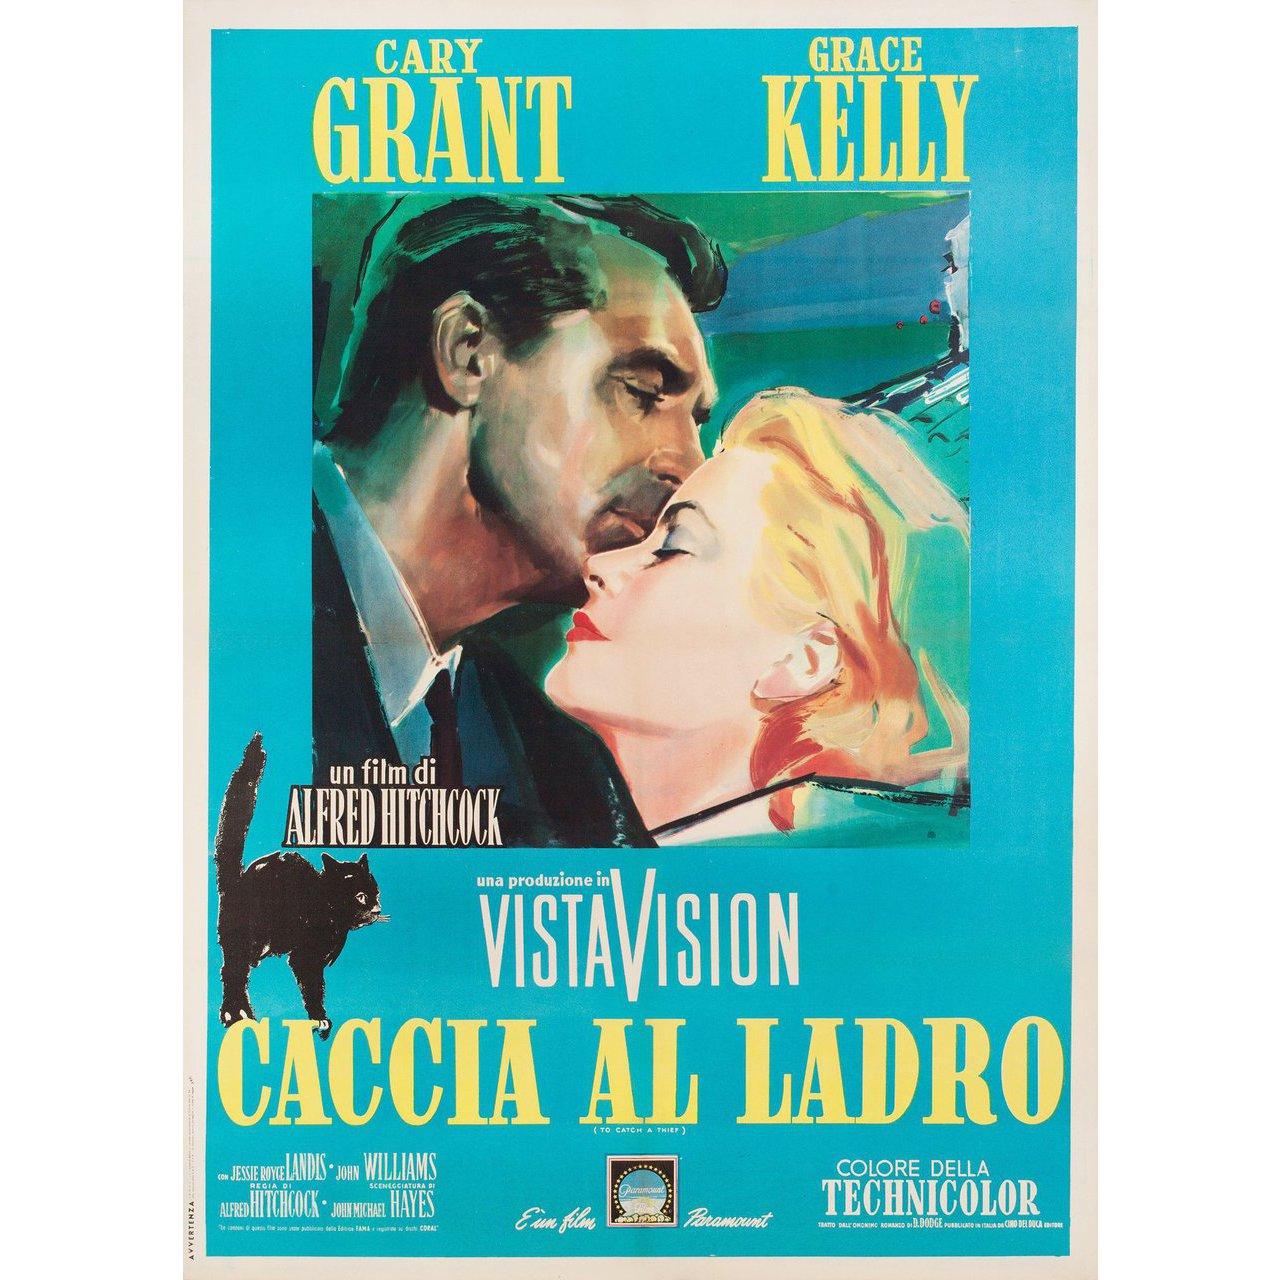 Original 1961 re-release Italian due fogli poster by Ercole Brini for the 1955 film To Catch a Thief directed by Alfred Hitchcock with Cary Grant / Grace Kelly / Jessie Royce Landis / John Williams. Fine condition, linen-backed. This poster has been